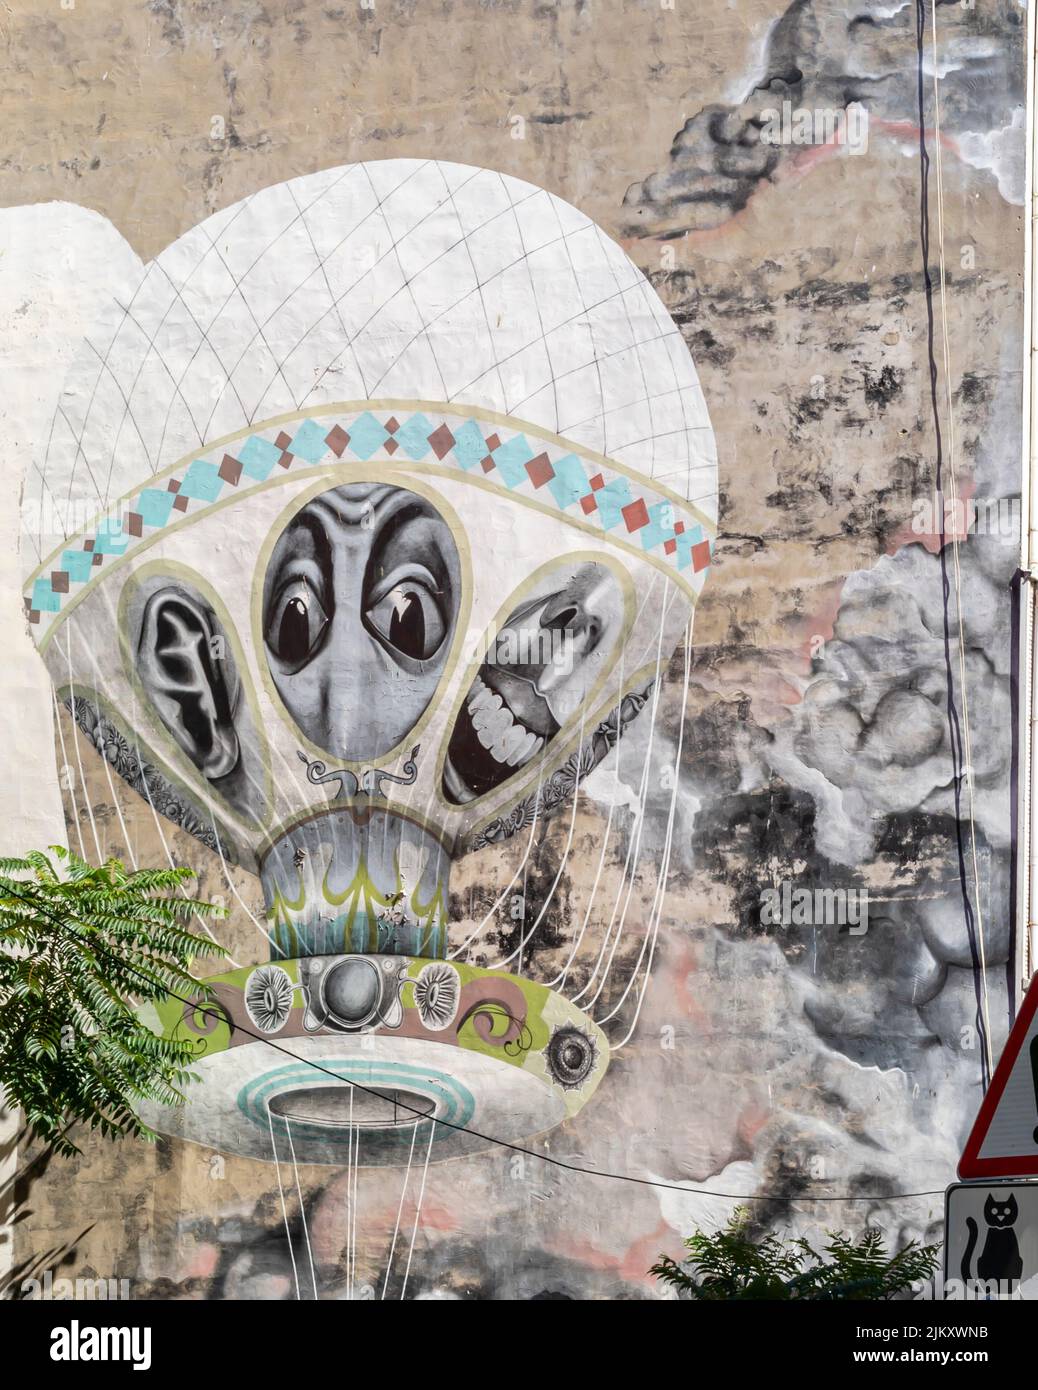 Street art, mural by Brazilian artist Claudio Ethos depicting hot air balloon with weird distorted faces, Kadiköy district of Istanbul, Turkey Stock Photo